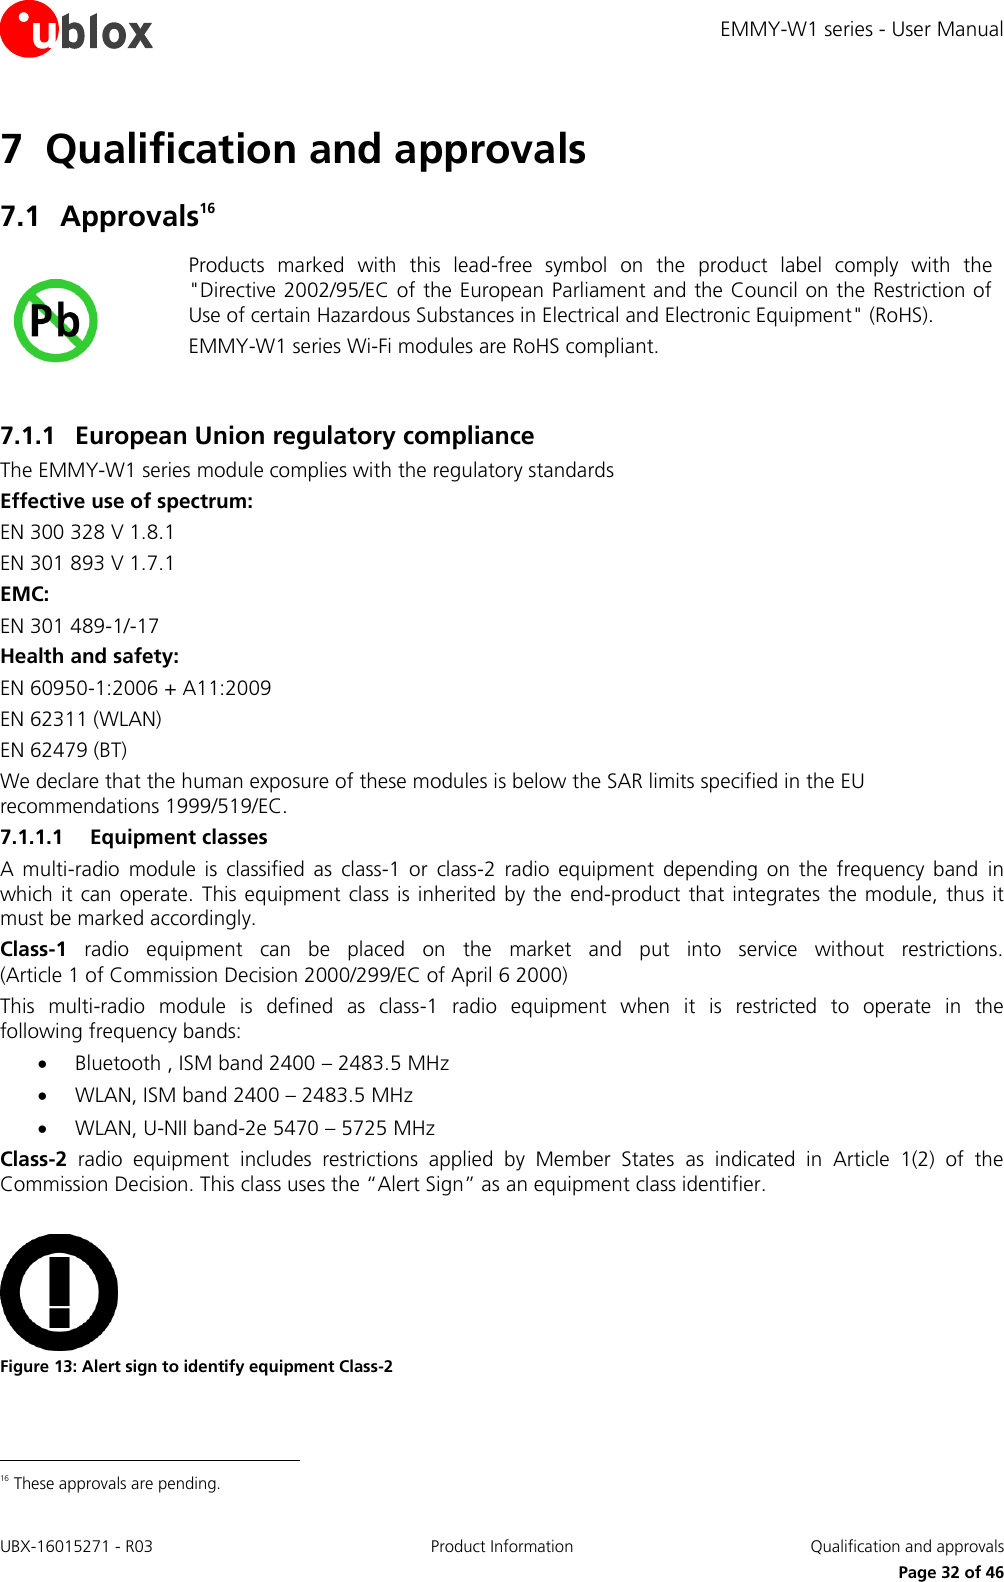 EMMY-W1 series - User Manual UBX-16015271 - R03 Product Information  Qualification and approvals     Page 32 of 46 7 Qualification and approvals  7.1 Approvals16  Products  marked  with  this  lead-free  symbol  on  the  product  label  comply  with  the &quot;Directive 2002/95/EC of the European Parliament and the Council on the Restriction of Use of certain Hazardous Substances in Electrical and Electronic Equipment&quot; (RoHS). EMMY-W1 series Wi-Fi modules are RoHS compliant.  7.1.1 European Union regulatory compliance The EMMY-W1 series module complies with the regulatory standards  Effective use of spectrum:  EN 300 328 V 1.8.1  EN 301 893 V 1.7.1 EMC: EN 301 489-1/-17 Health and safety:  EN 60950-1:2006 + A11:2009 EN 62311 (WLAN) EN 62479 (BT) We declare that the human exposure of these modules is below the SAR limits specified in the EU recommendations 1999/519/EC. 7.1.1.1 Equipment classes A  multi-radio  module  is  classified  as  class-1  or  class-2  radio  equipment  depending  on  the  frequency  band  in which it  can operate.  This equipment class  is inherited  by the  end-product that  integrates the module,  thus it must be marked accordingly.   Class-1  radio  equipment  can  be  placed  on  the  market  and  put  into  service  without  restrictions. (Article 1 of Commission Decision 2000/299/EC of April 6 2000) This  multi-radio  module  is  defined  as  class-1  radio  equipment  when  it  is  restricted  to  operate  in  the following frequency bands:  Bluetooth , ISM band 2400 – 2483.5 MHz  WLAN, ISM band 2400 – 2483.5 MHz  WLAN, U-NII band-2e 5470 – 5725 MHz  Class-2  radio  equipment  includes  restrictions  applied  by  Member  States  as  indicated  in  Article  1(2)  of  the Commission Decision. This class uses the “Alert Sign” as an equipment class identifier.   Figure 13: Alert sign to identify equipment Class-2                                                        16 These approvals are pending.  